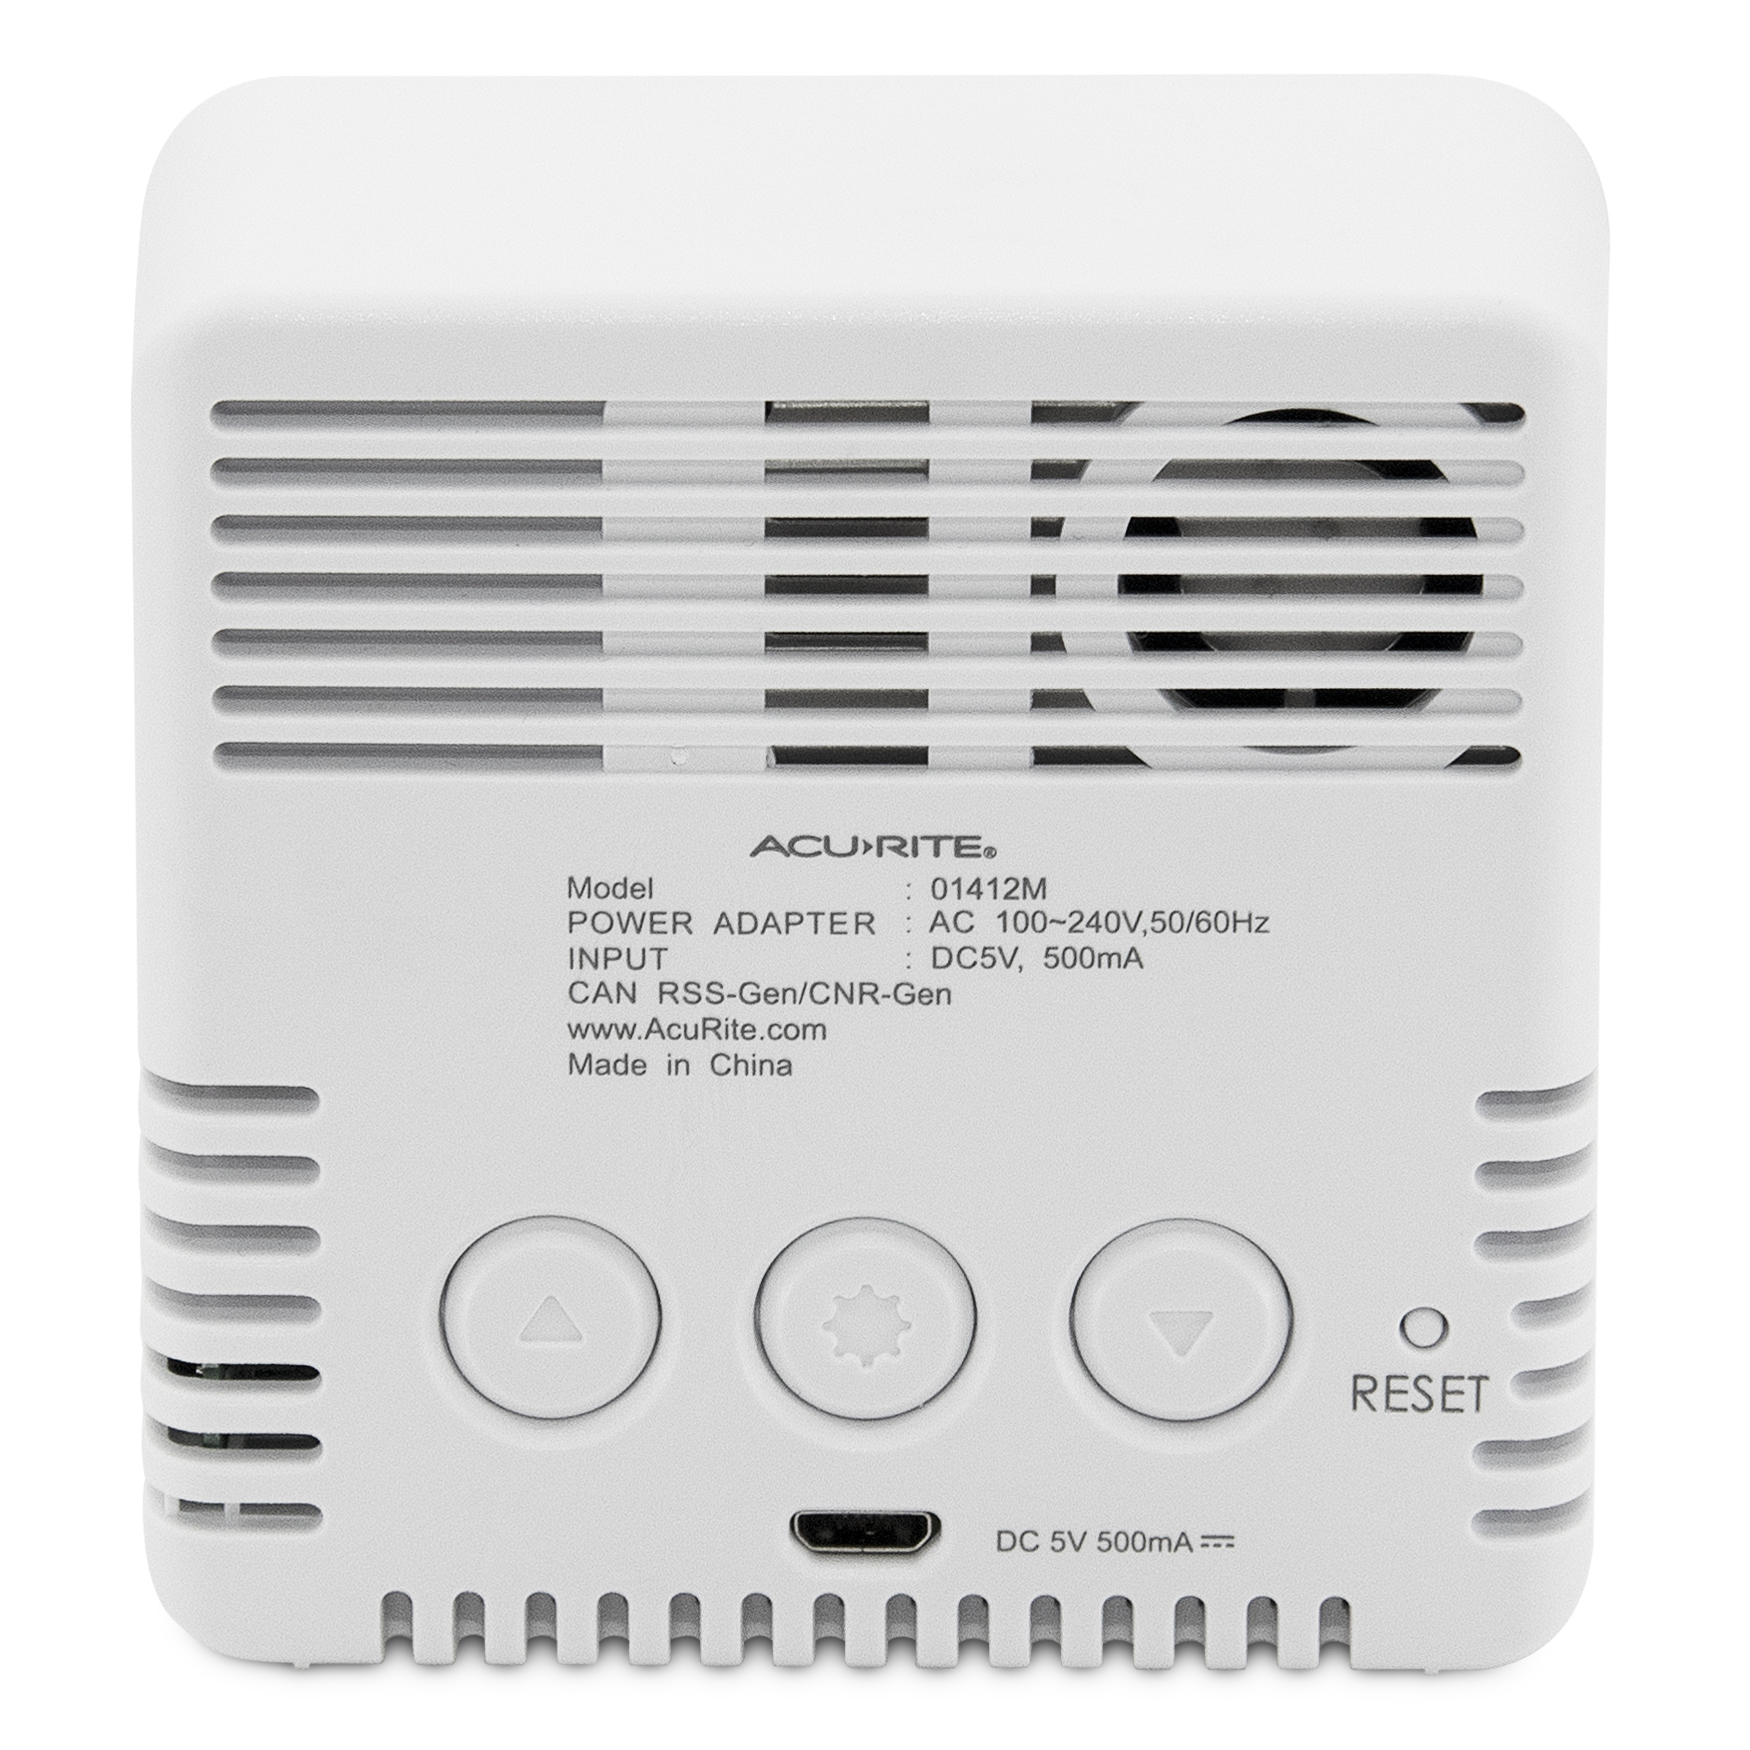 AcuRite AIR® Indoor Air Quality Monitor with PM2.5, Temperature, and Humidity Measurements (01412M) - image 5 of 9